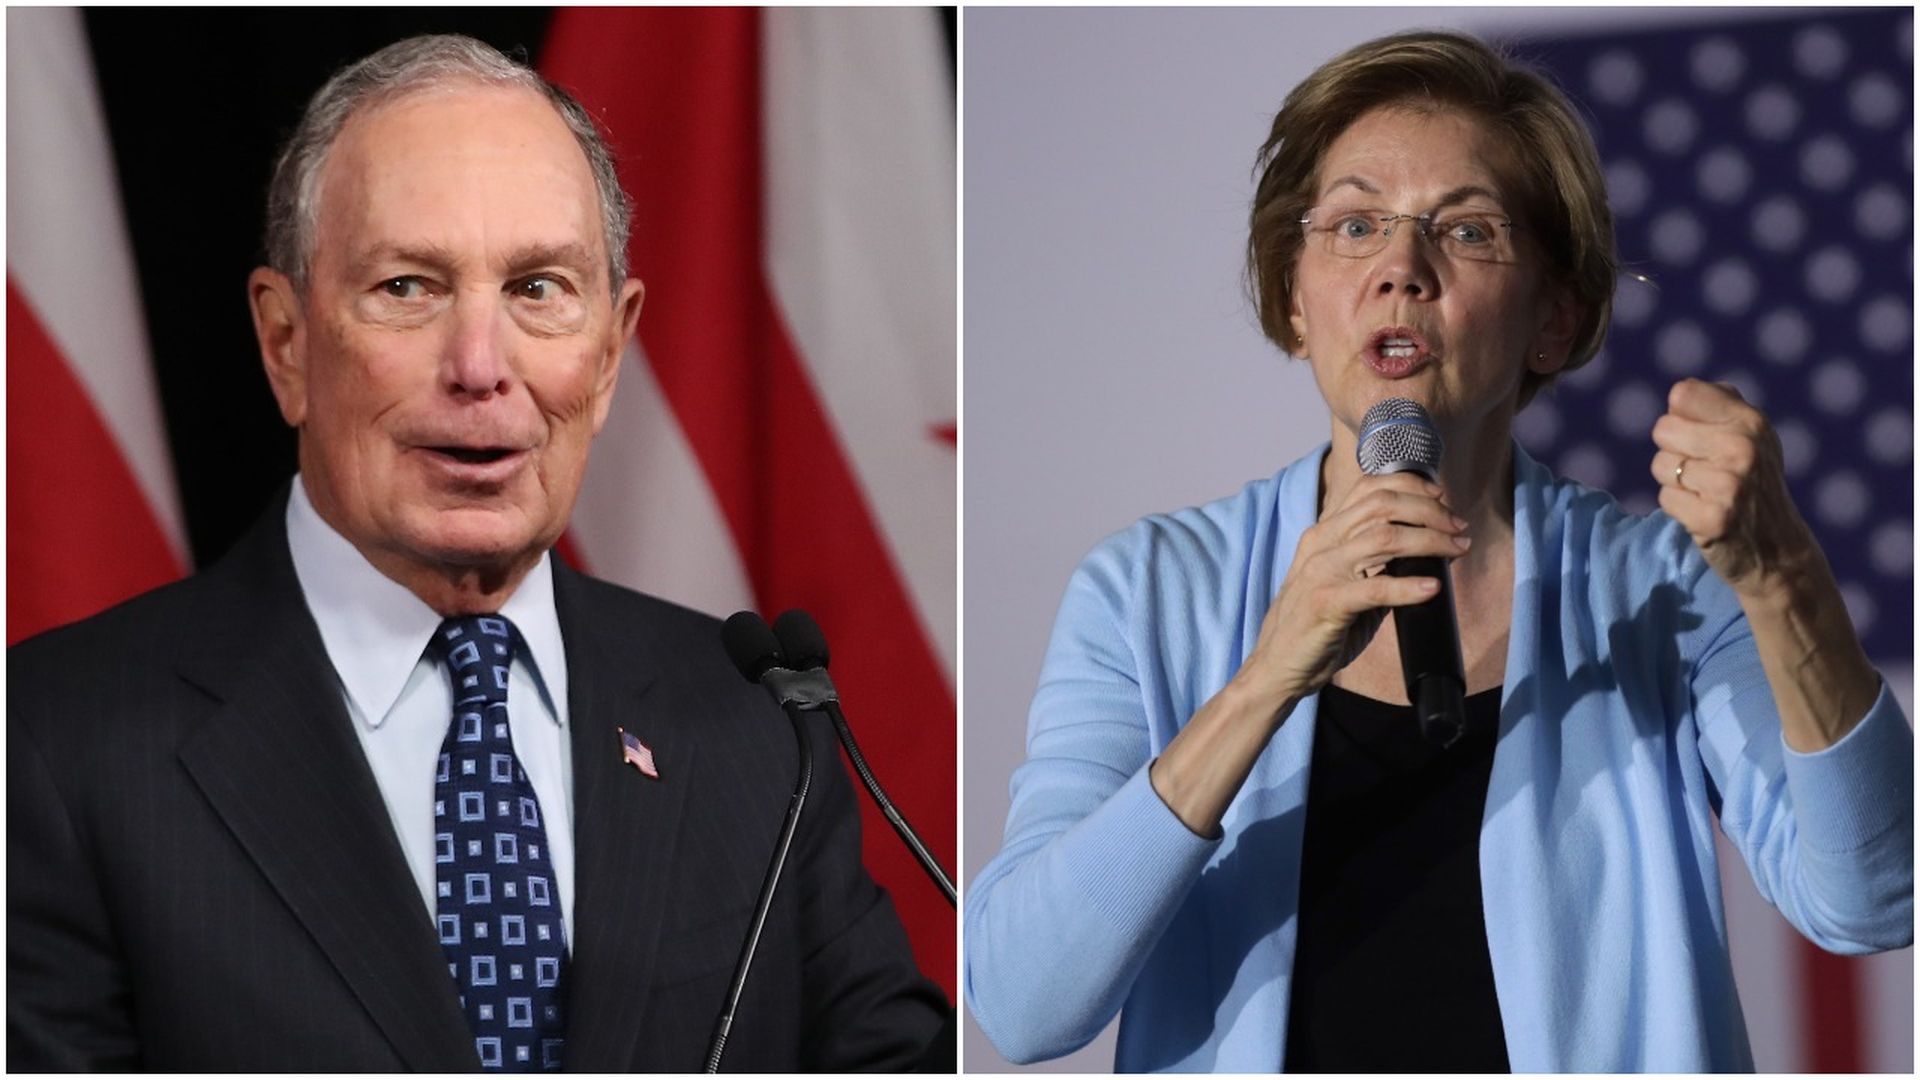 This image is a split screen of Warren and Bloomberg